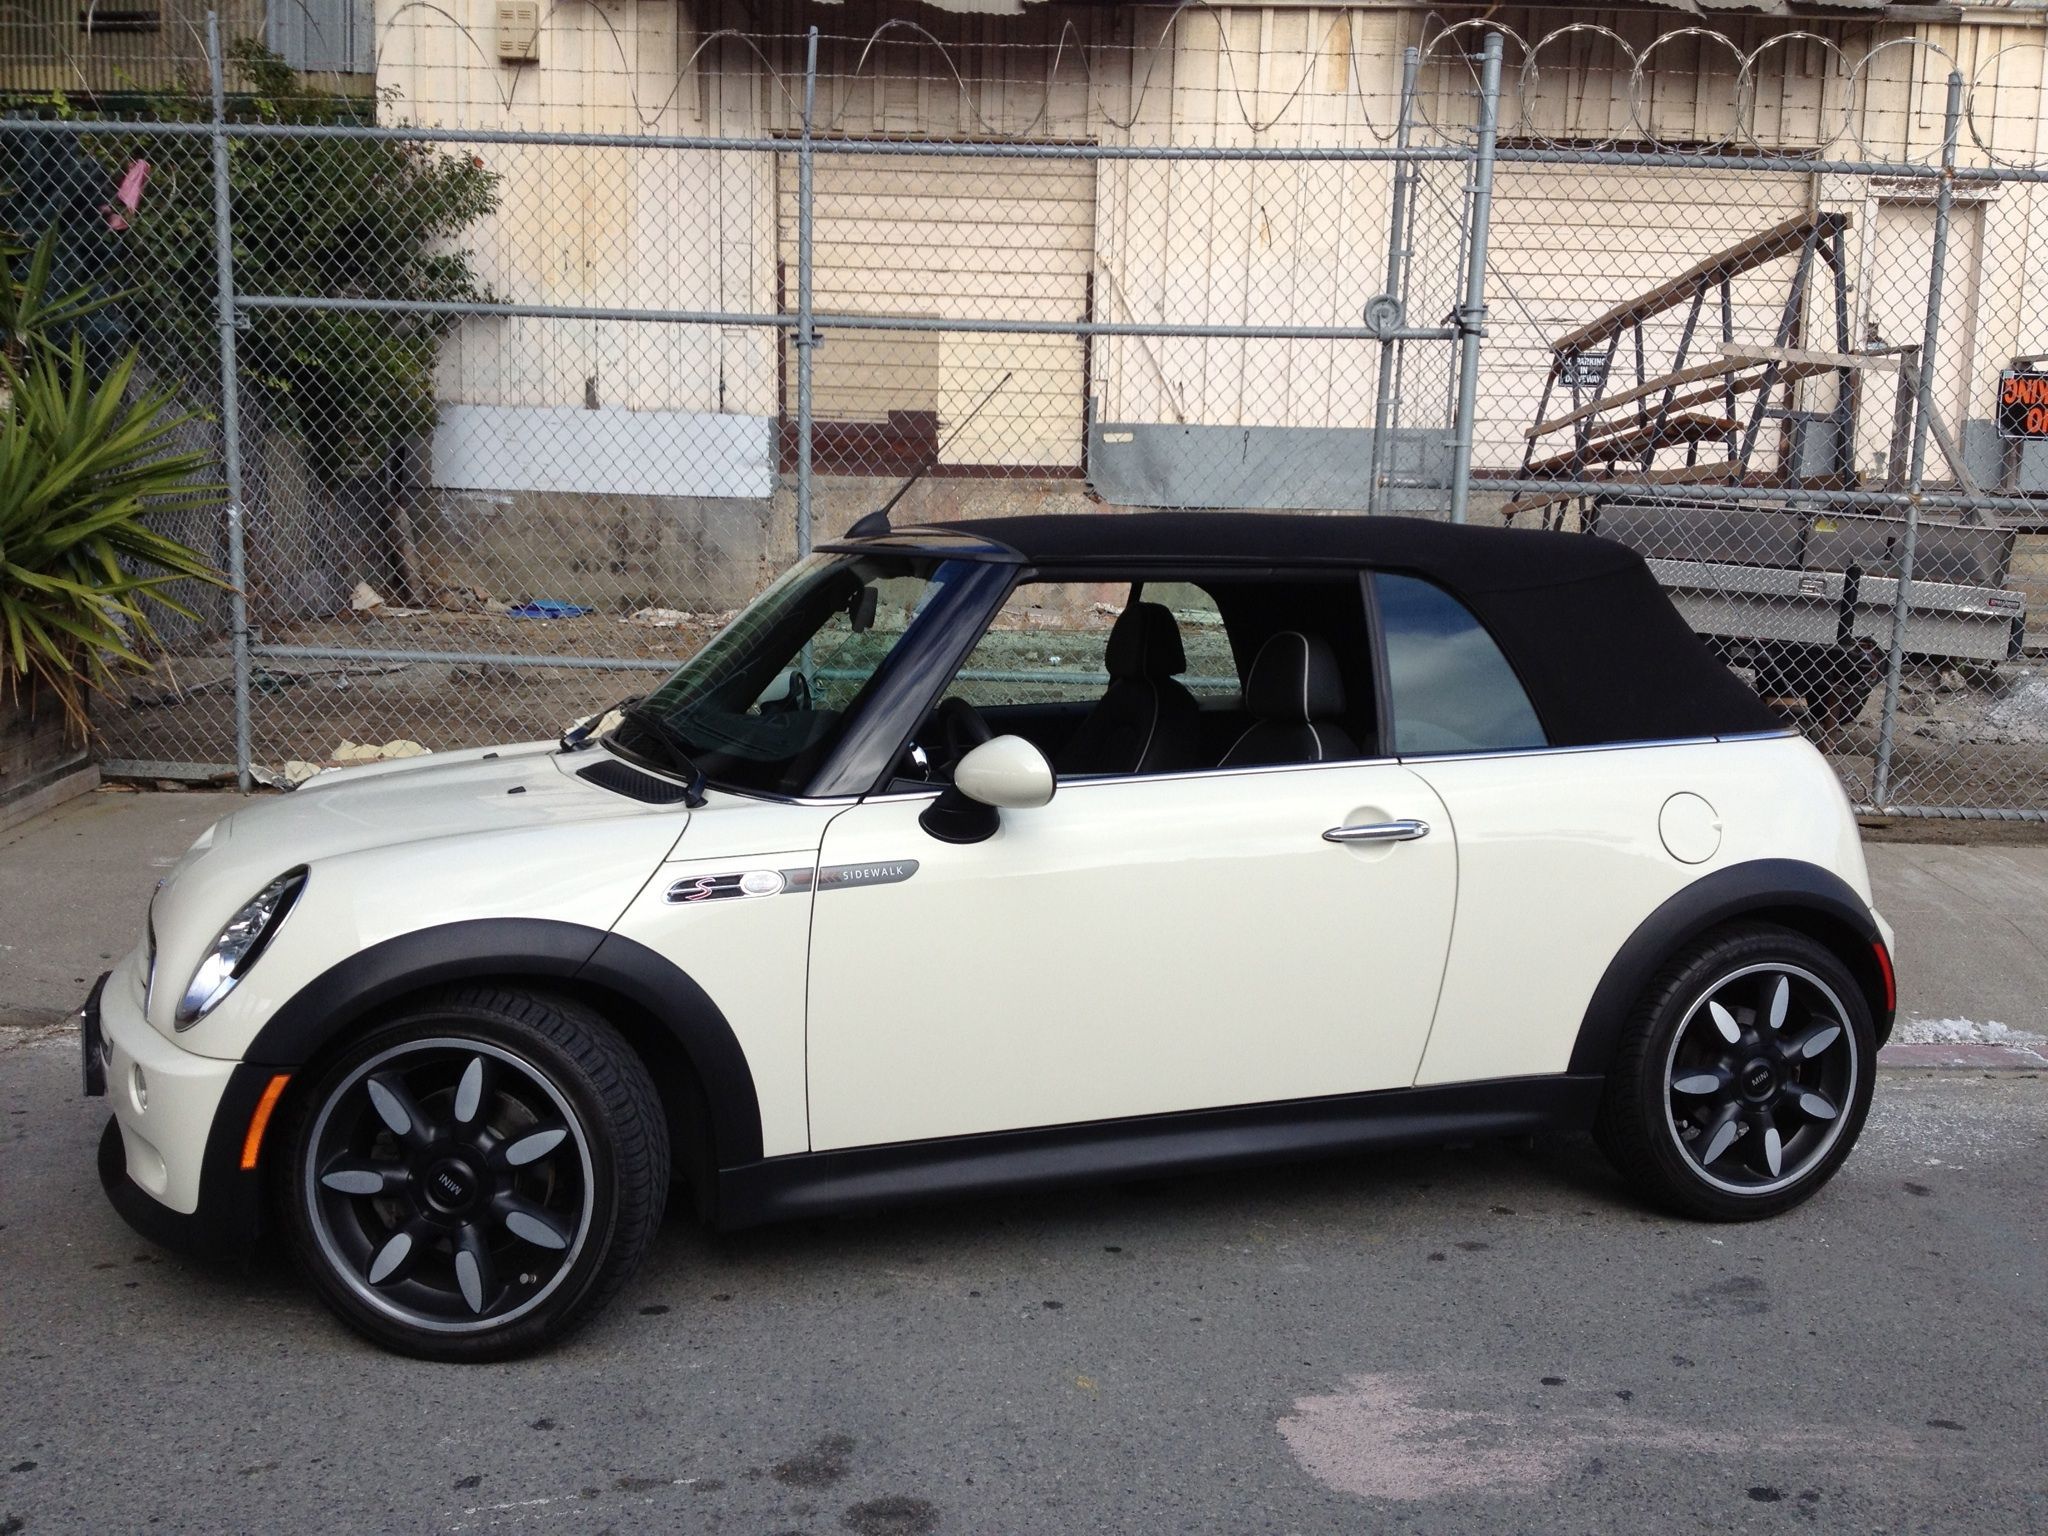 It turns out it's difficult to find a shop to replace a Mini Cooper engine